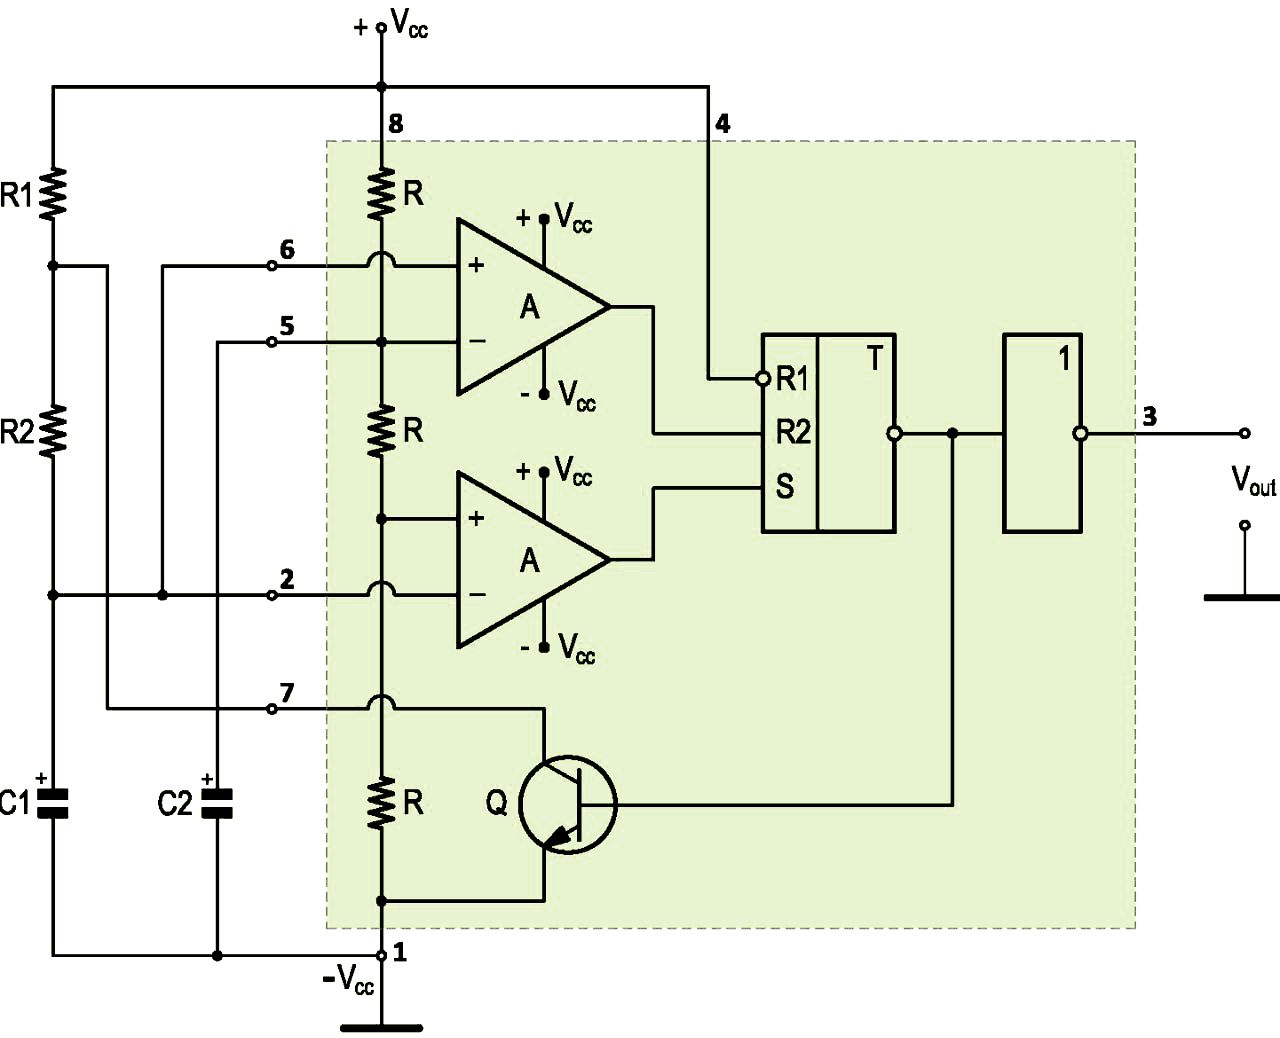 Generator circuit based on IC 555 with external elements